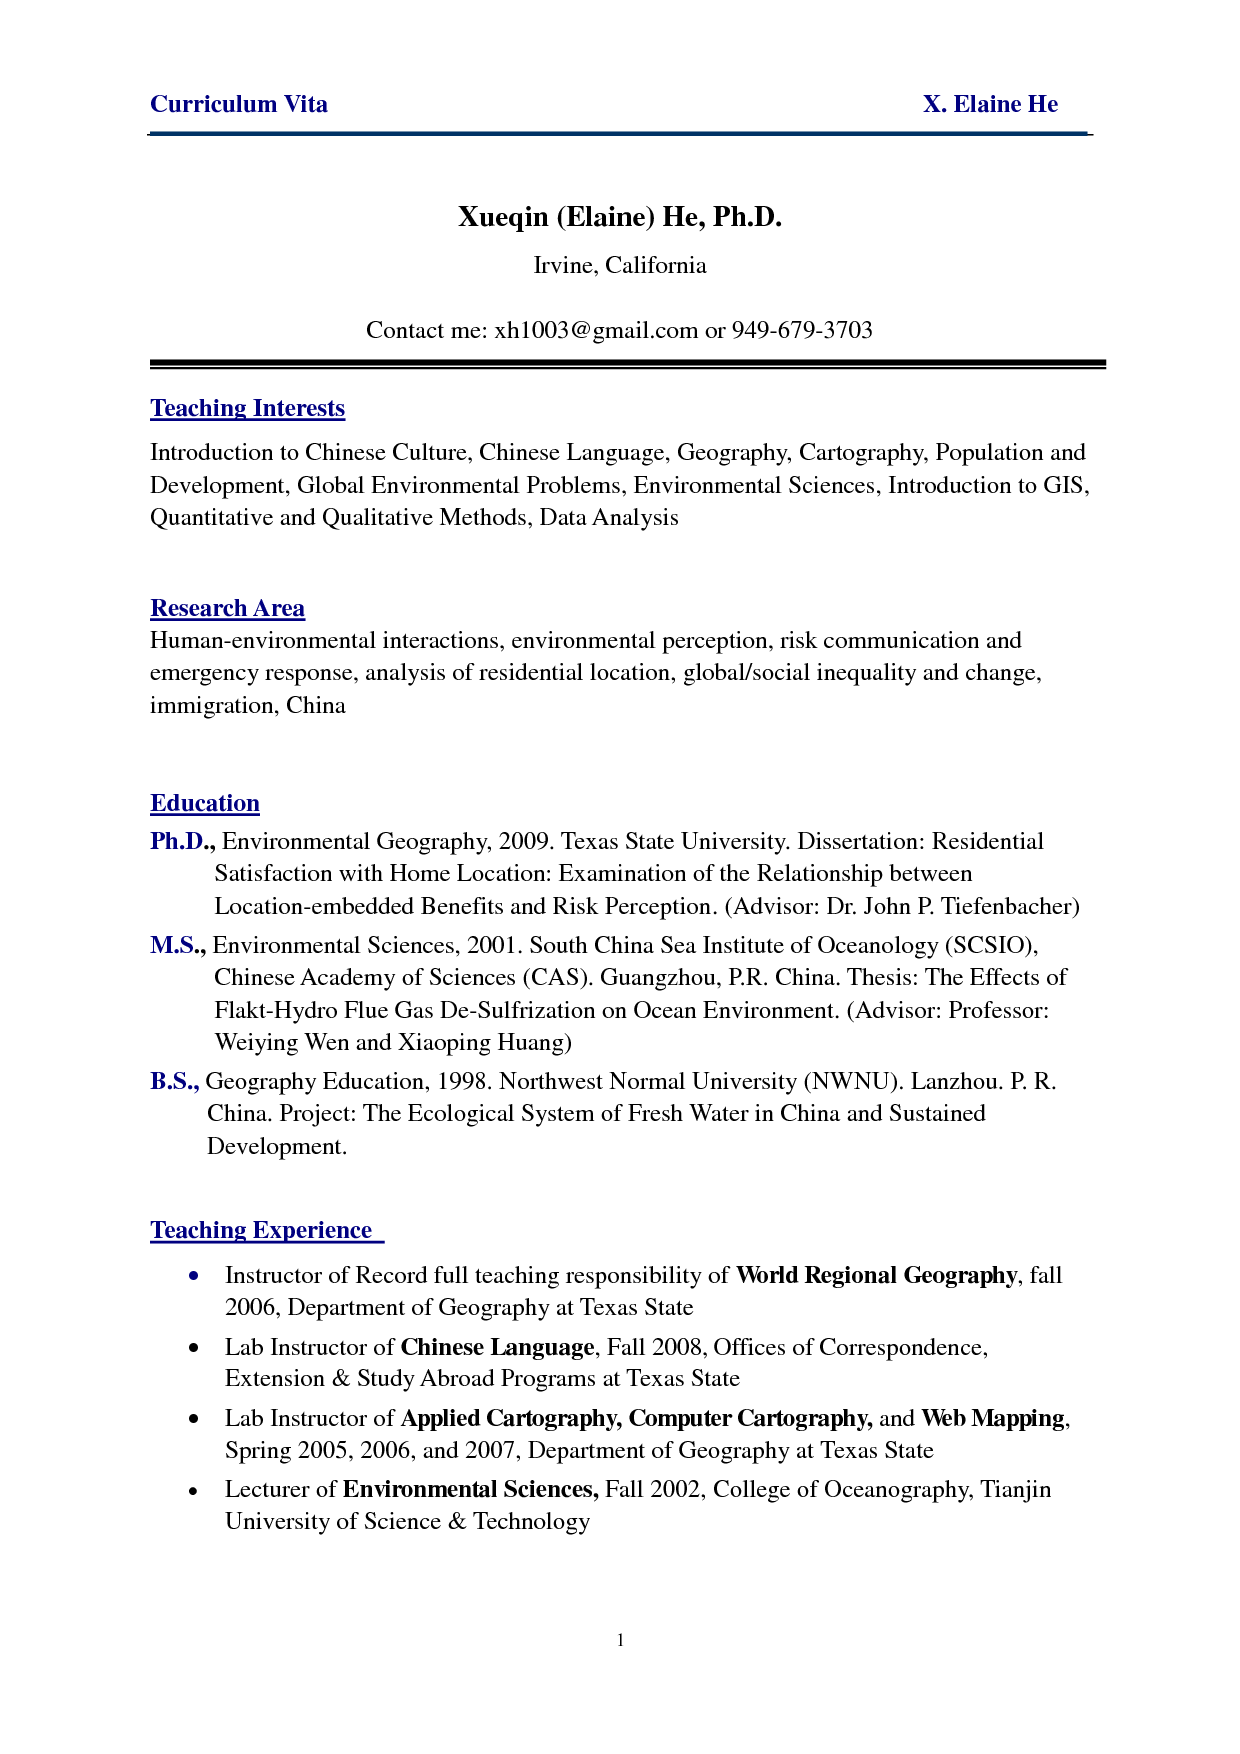 example resume objectives for lpn